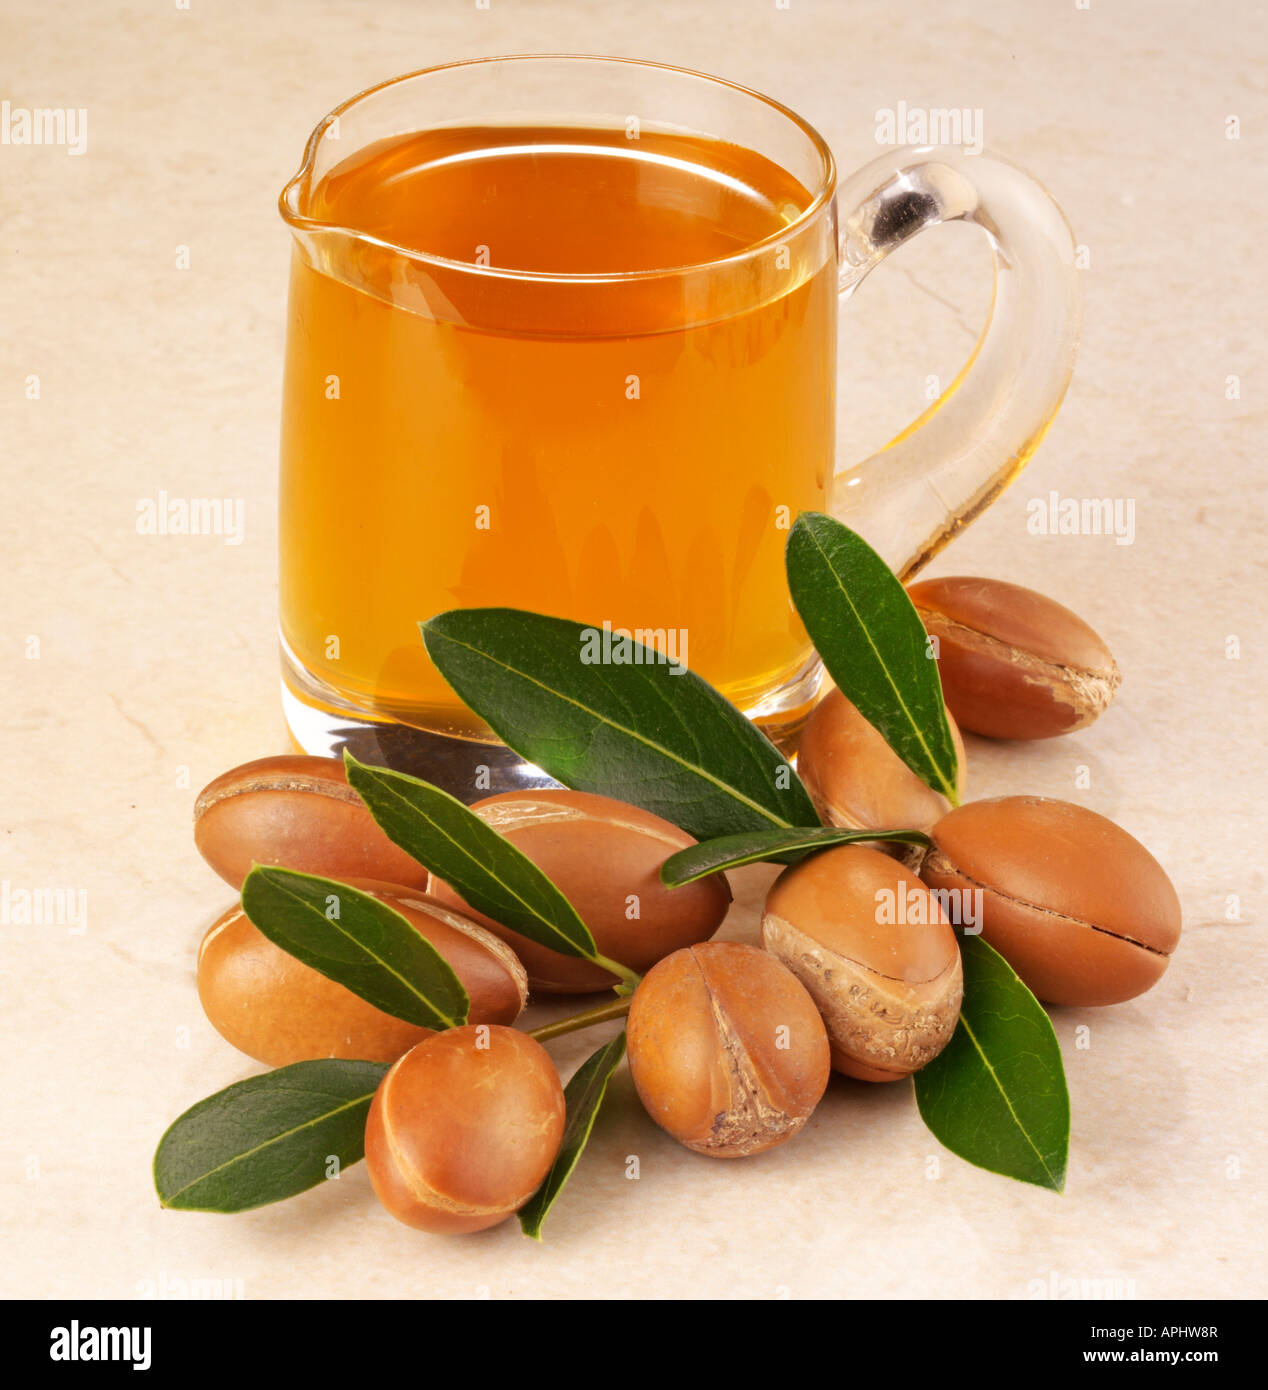 ARGAN OIL AND NUTS Stock Photo